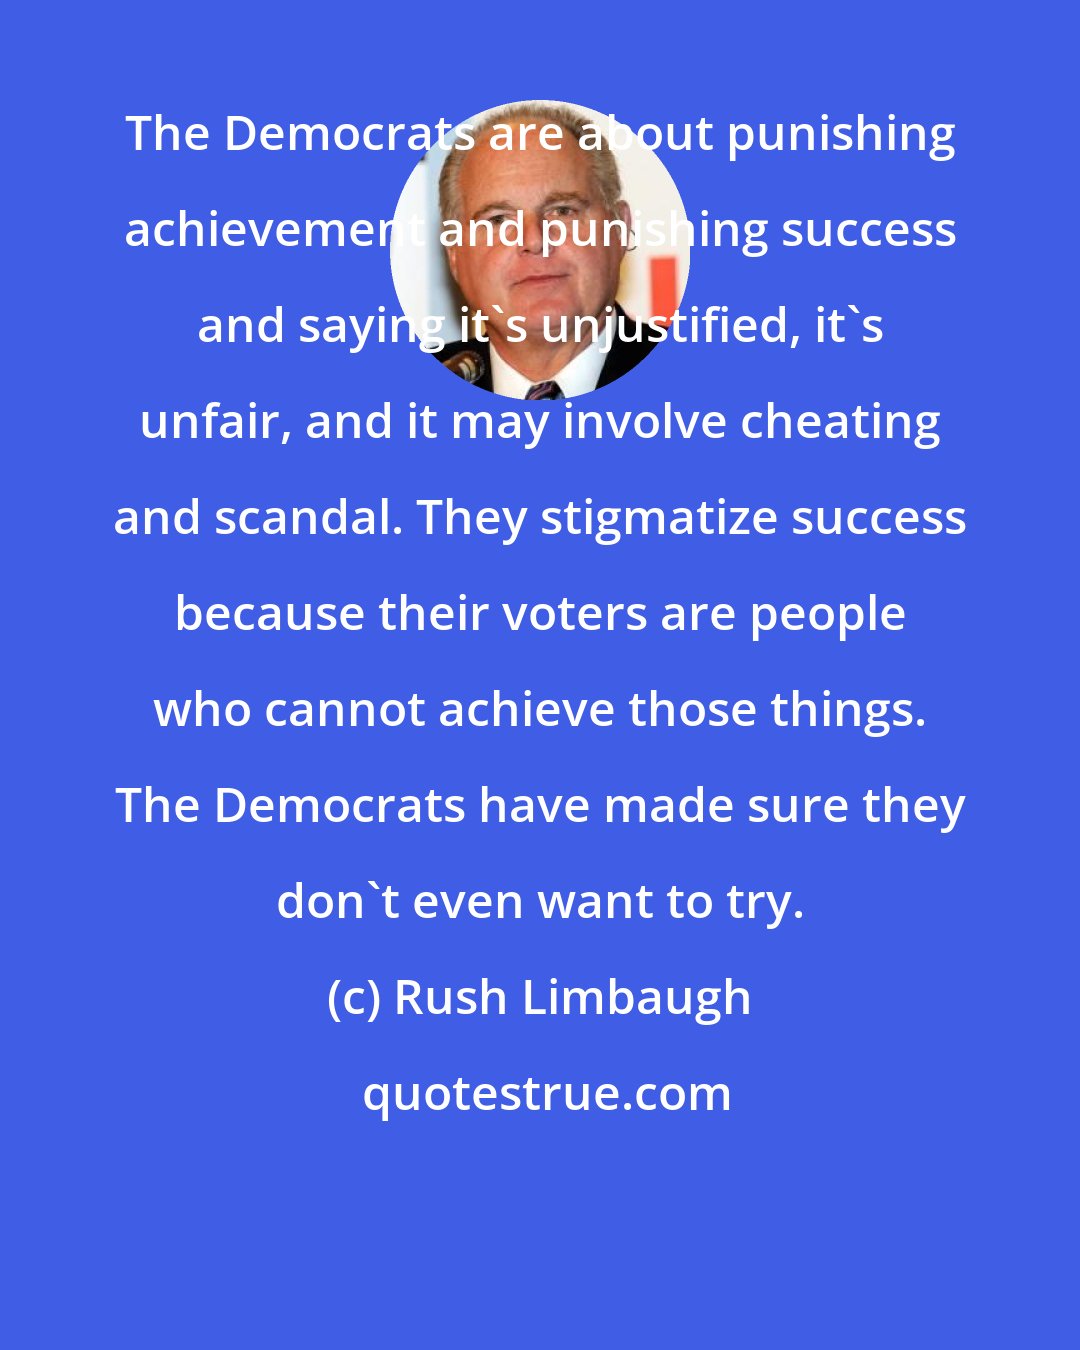 Rush Limbaugh: The Democrats are about punishing achievement and punishing success and saying it's unjustified, it's unfair, and it may involve cheating and scandal. They stigmatize success because their voters are people who cannot achieve those things. The Democrats have made sure they don't even want to try.